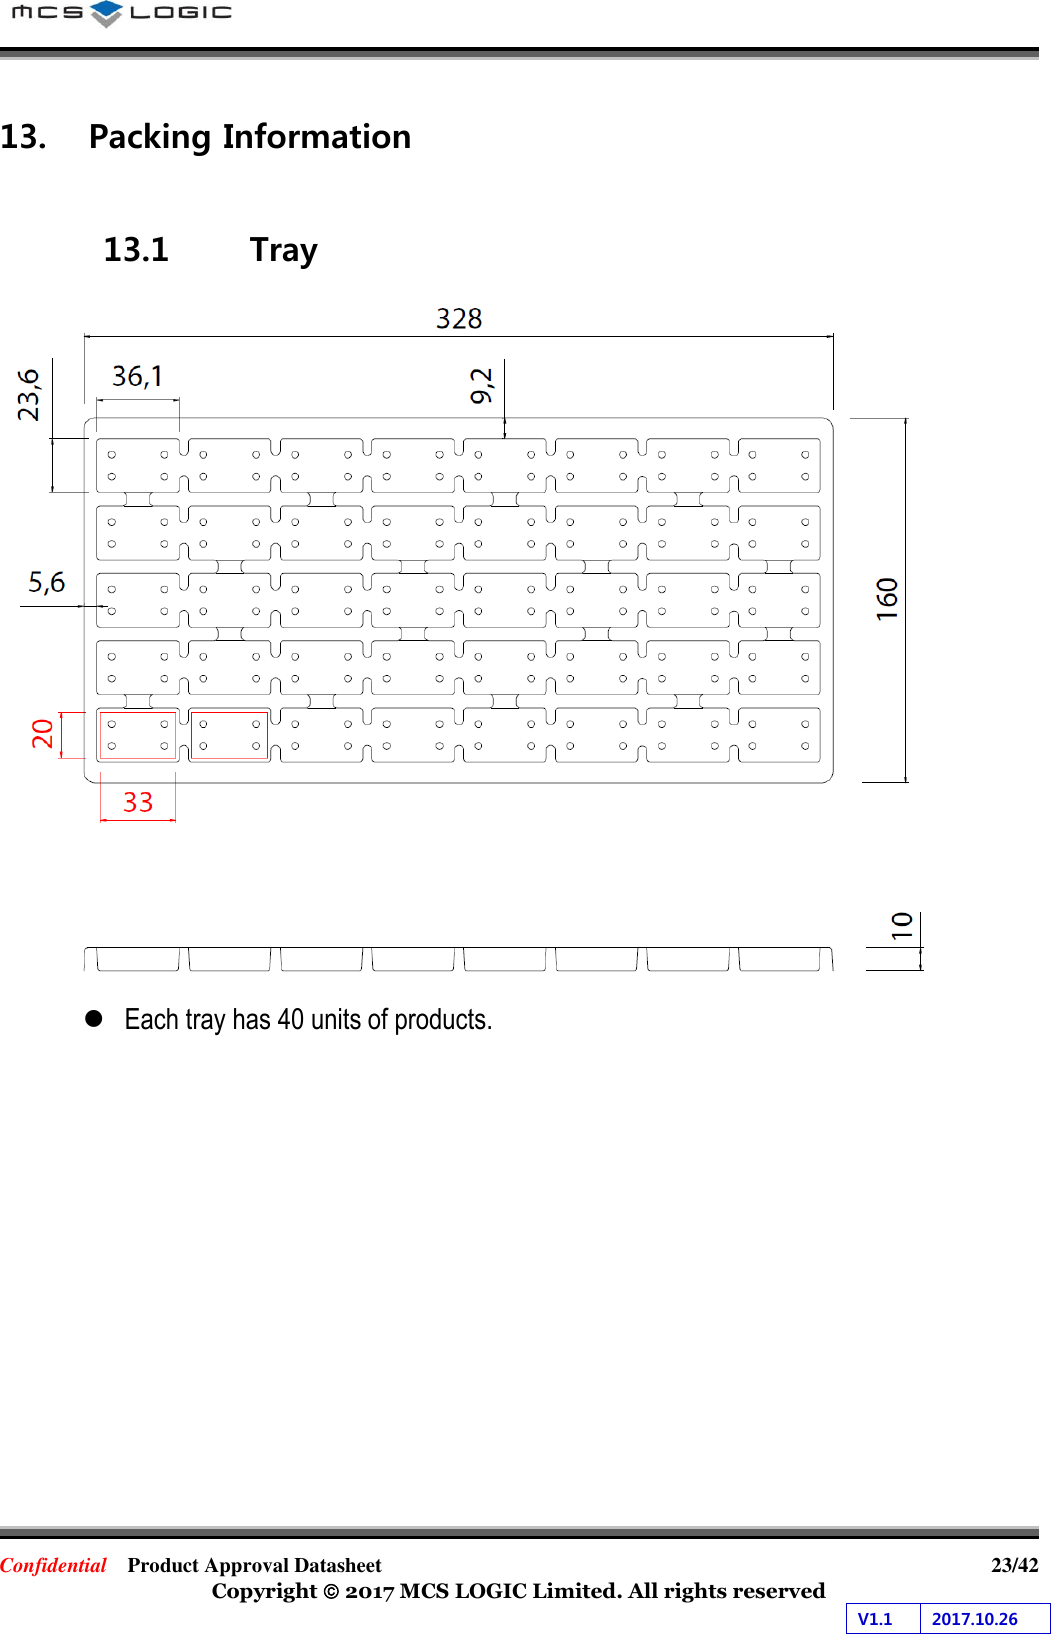 Confidential  Product Approval Datasheet  23/42 Copyright  2017 MCS LOGIC Limited. All rights reserved V1.1 2017.10.26 13. Packing Information13.1 Tray Each tray has 40 units of products.